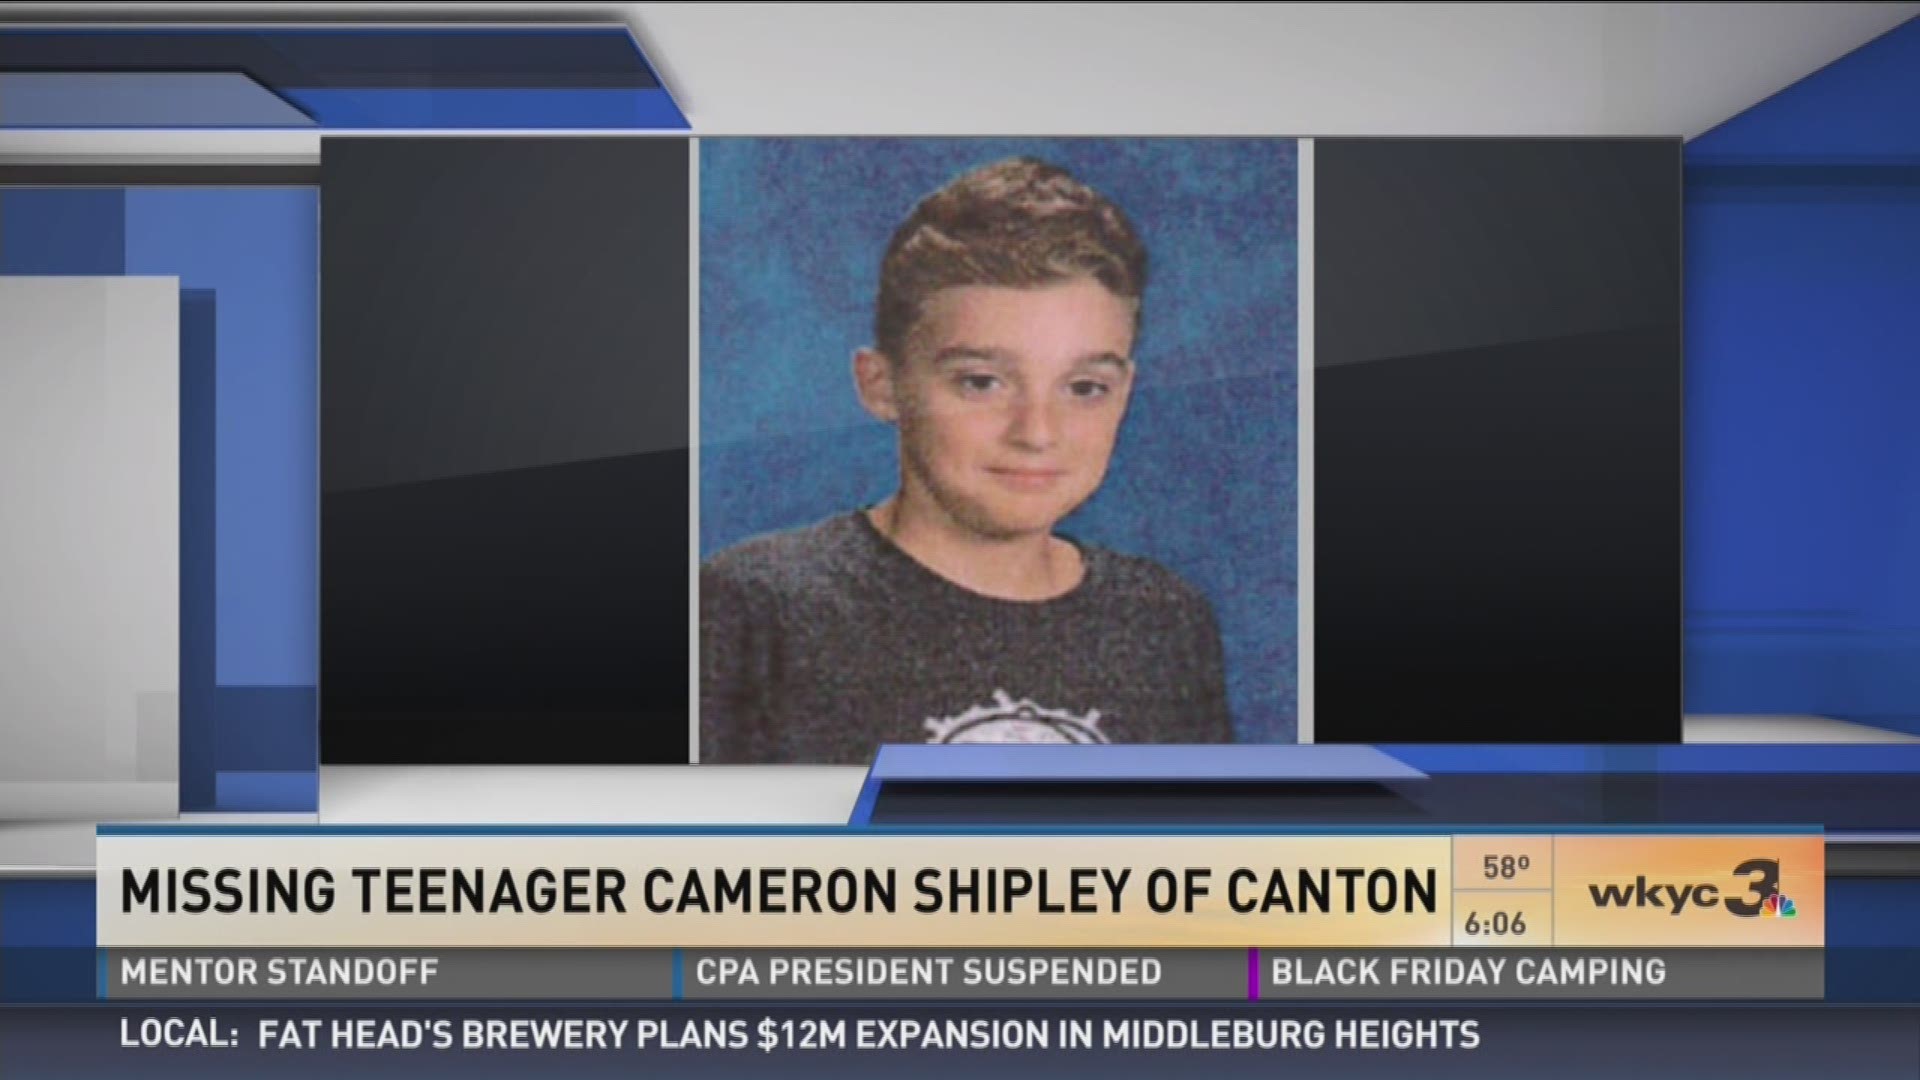 Nov. 18, 2016: Police are asking for the public's help in finding Cameron Scott Shipley.